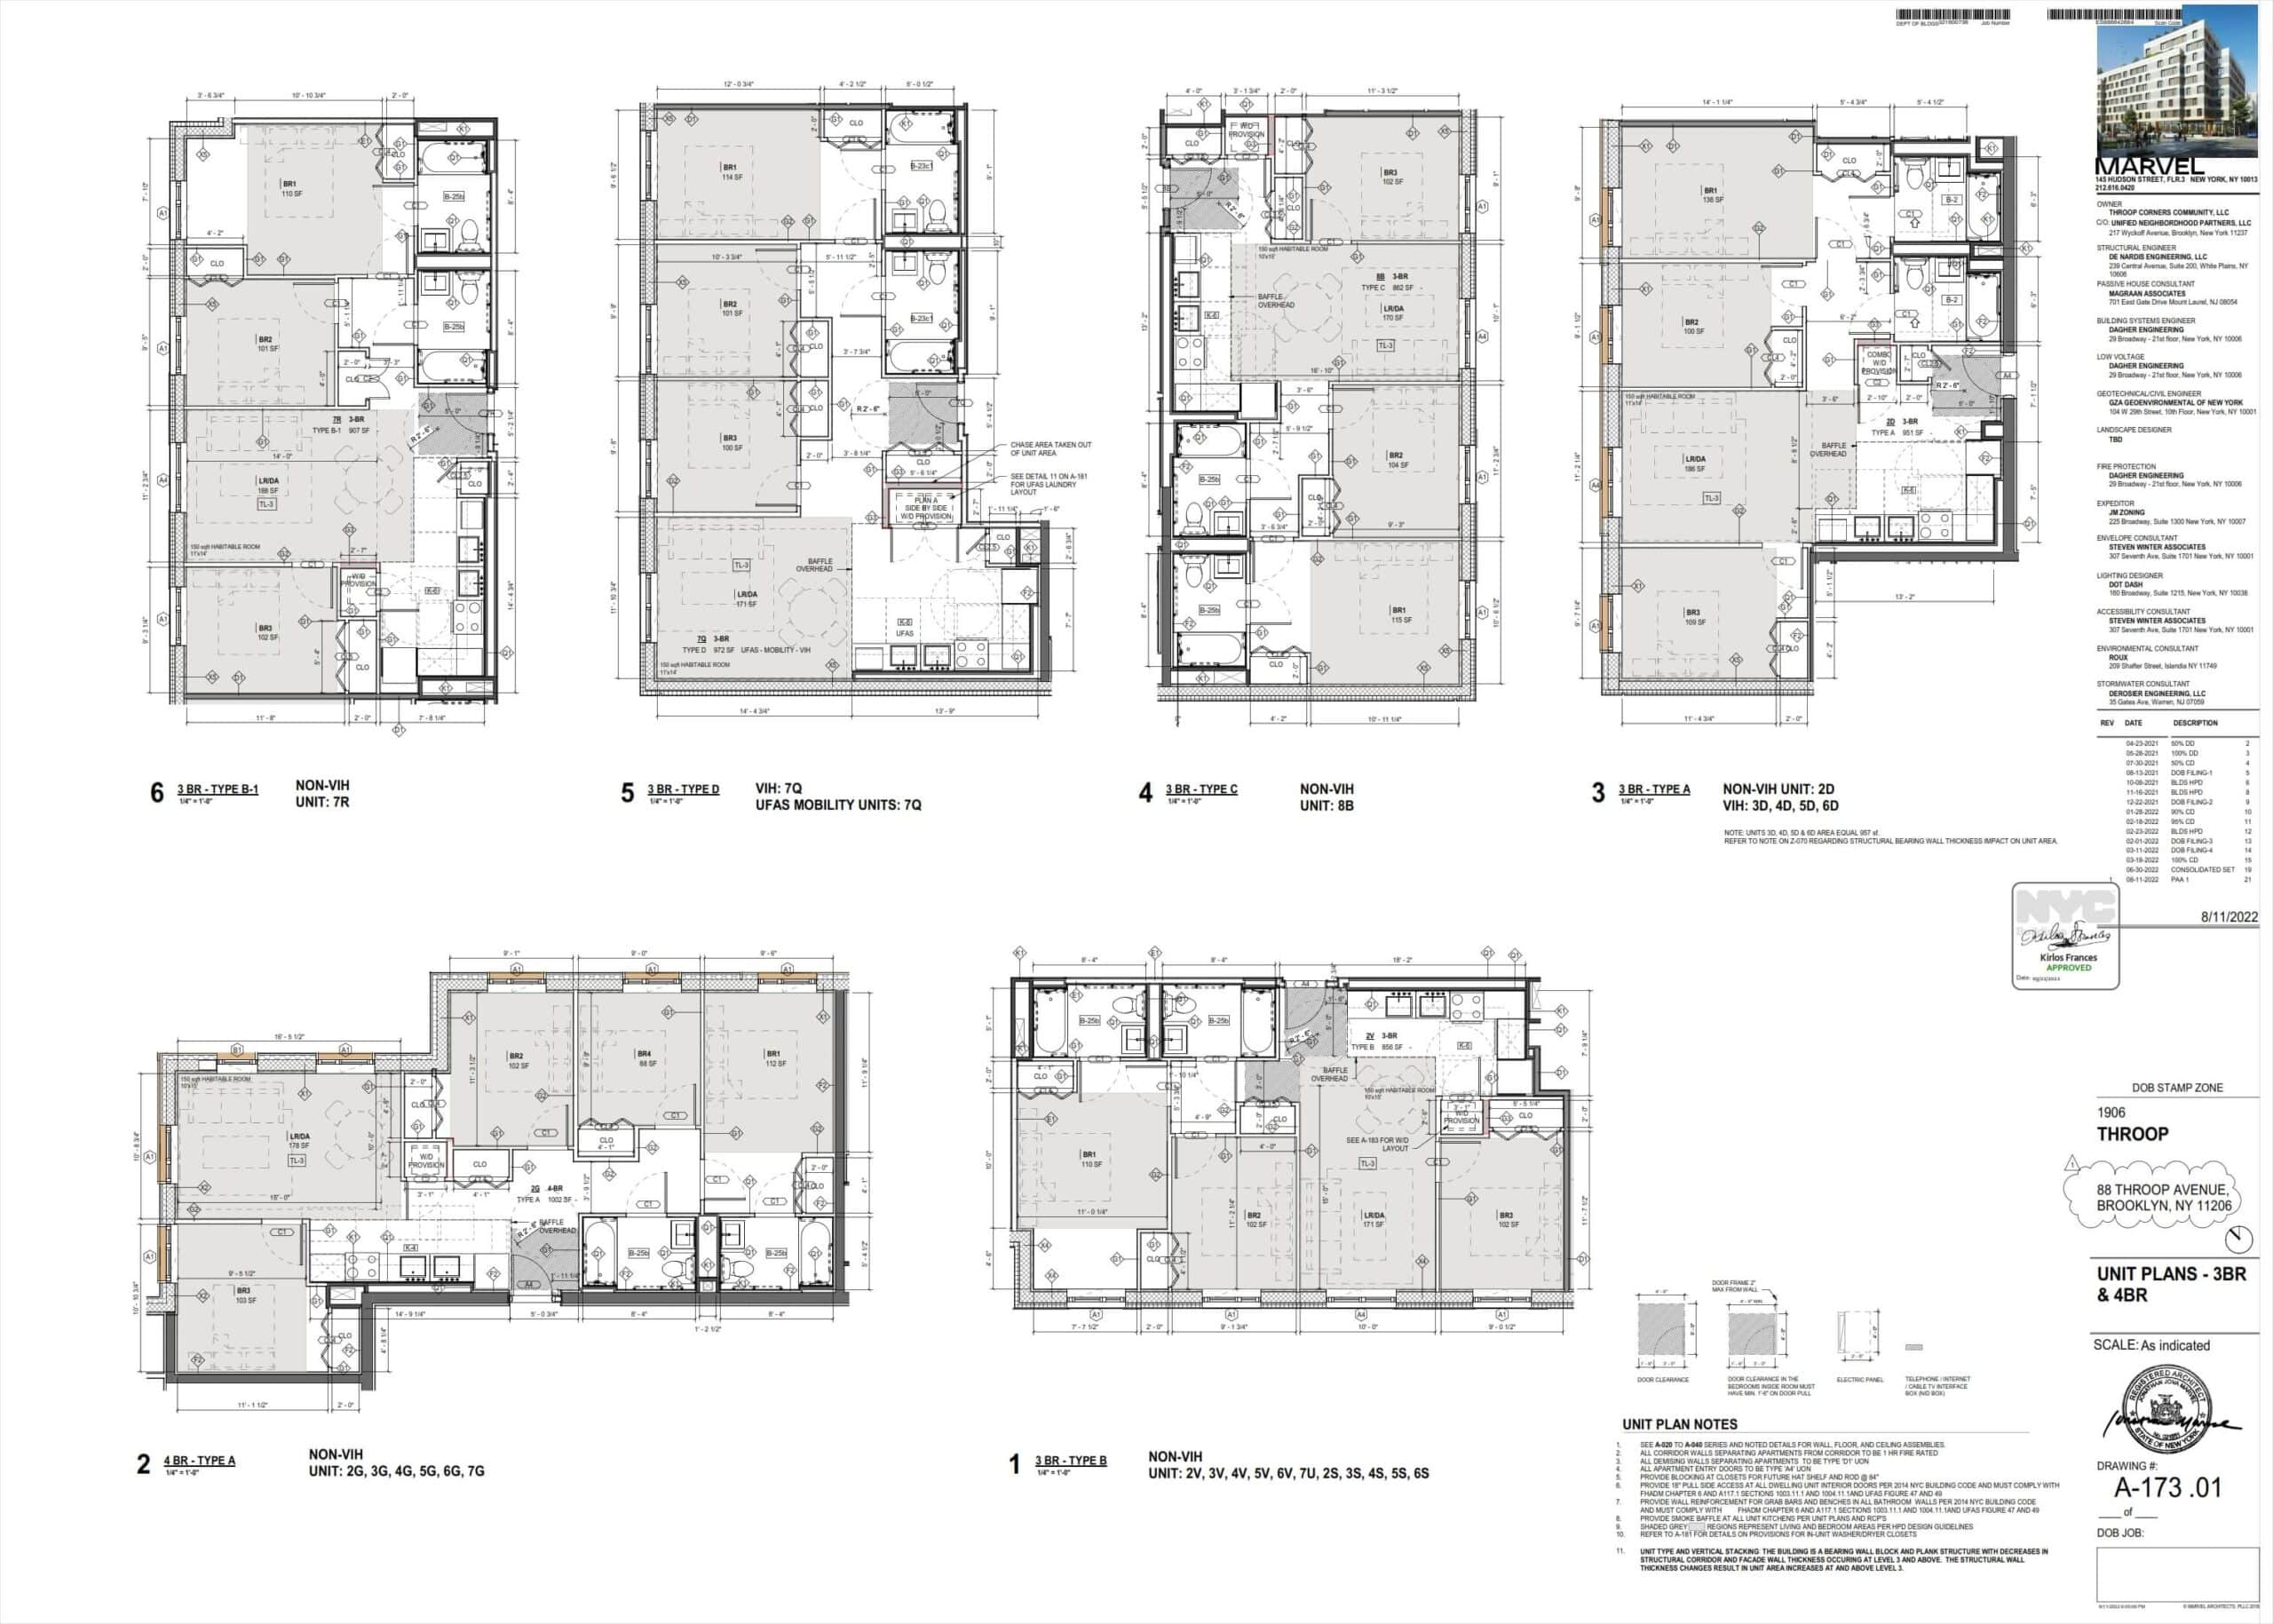 floor plans showing three and four bedroom units